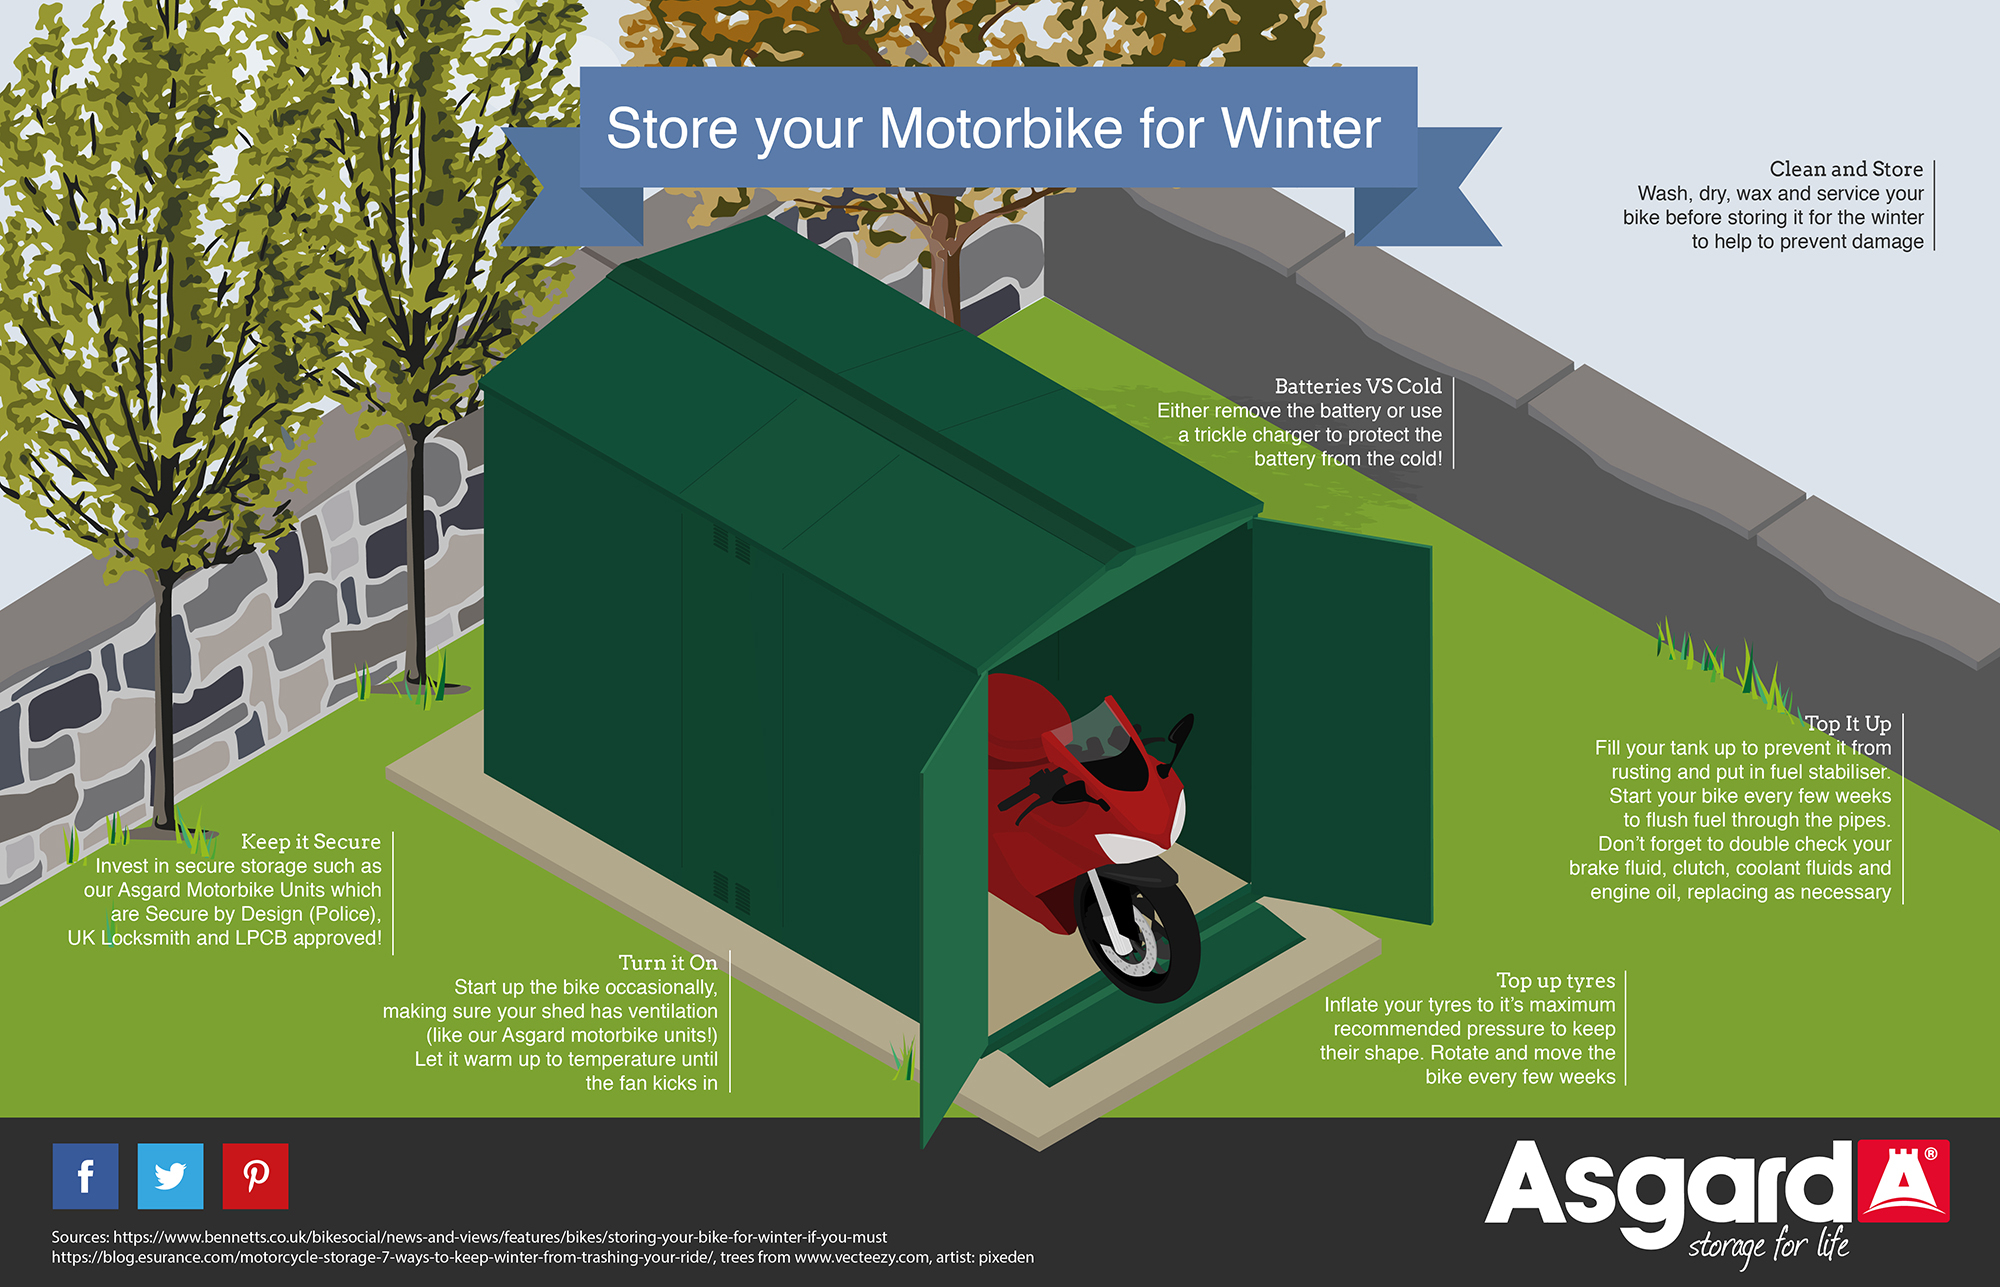 Storing you Motorbike for winter